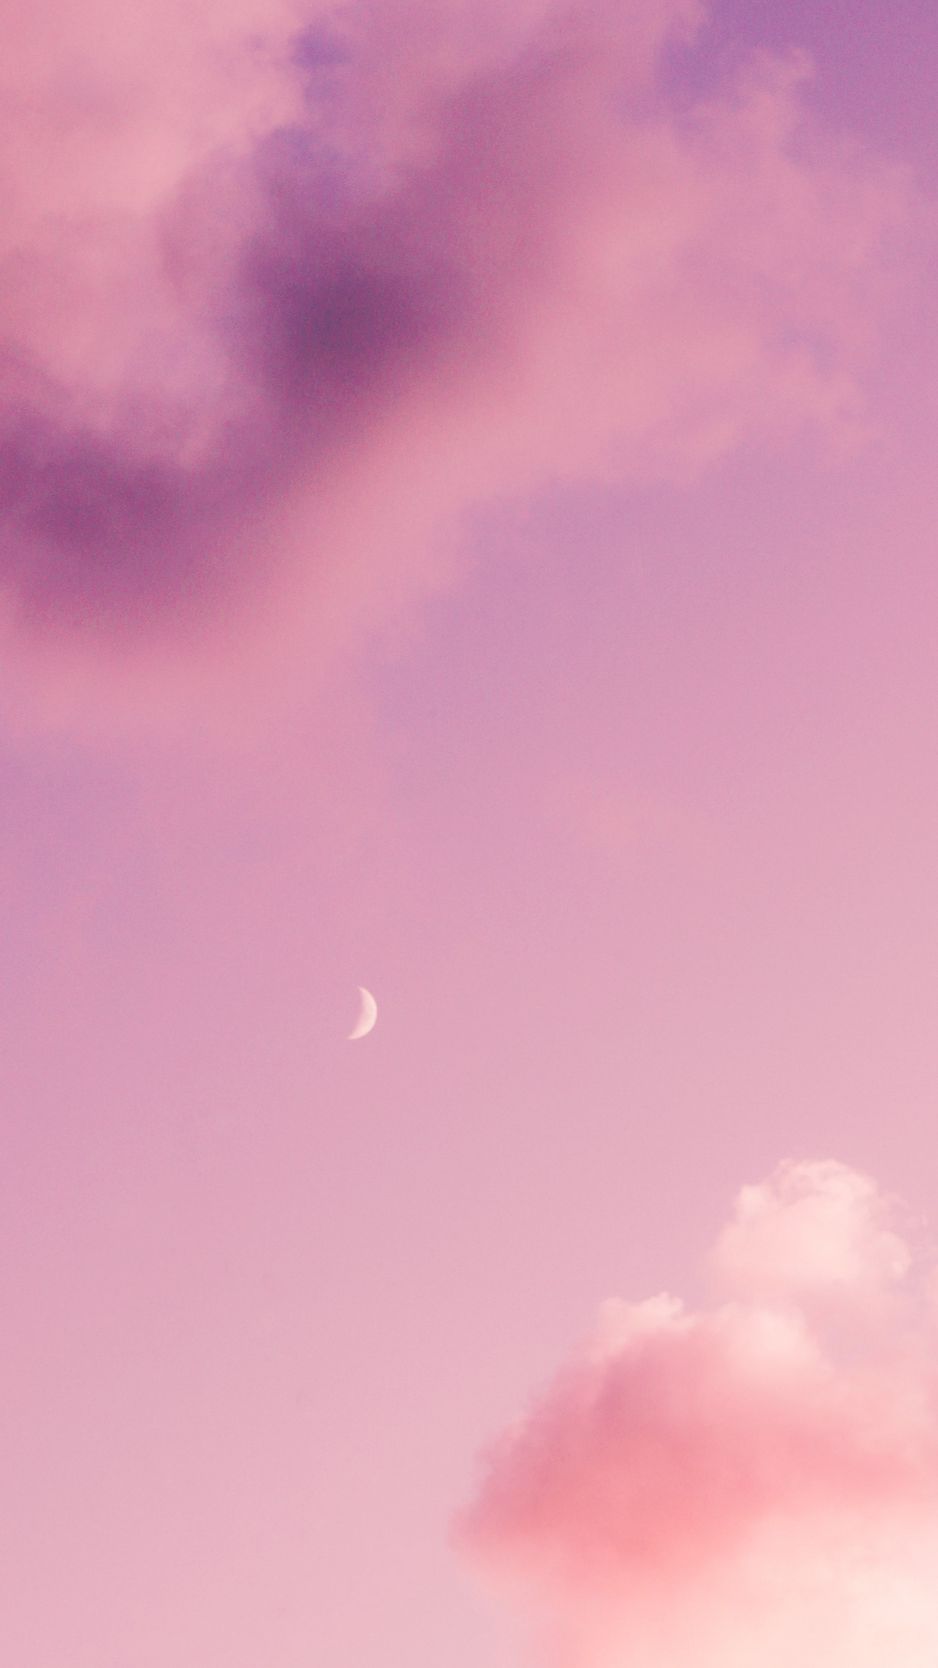 Download wallpaper 938x1668 moon, pink, clouds, sky iphone 8/7/6s/6 for  parallax hd background